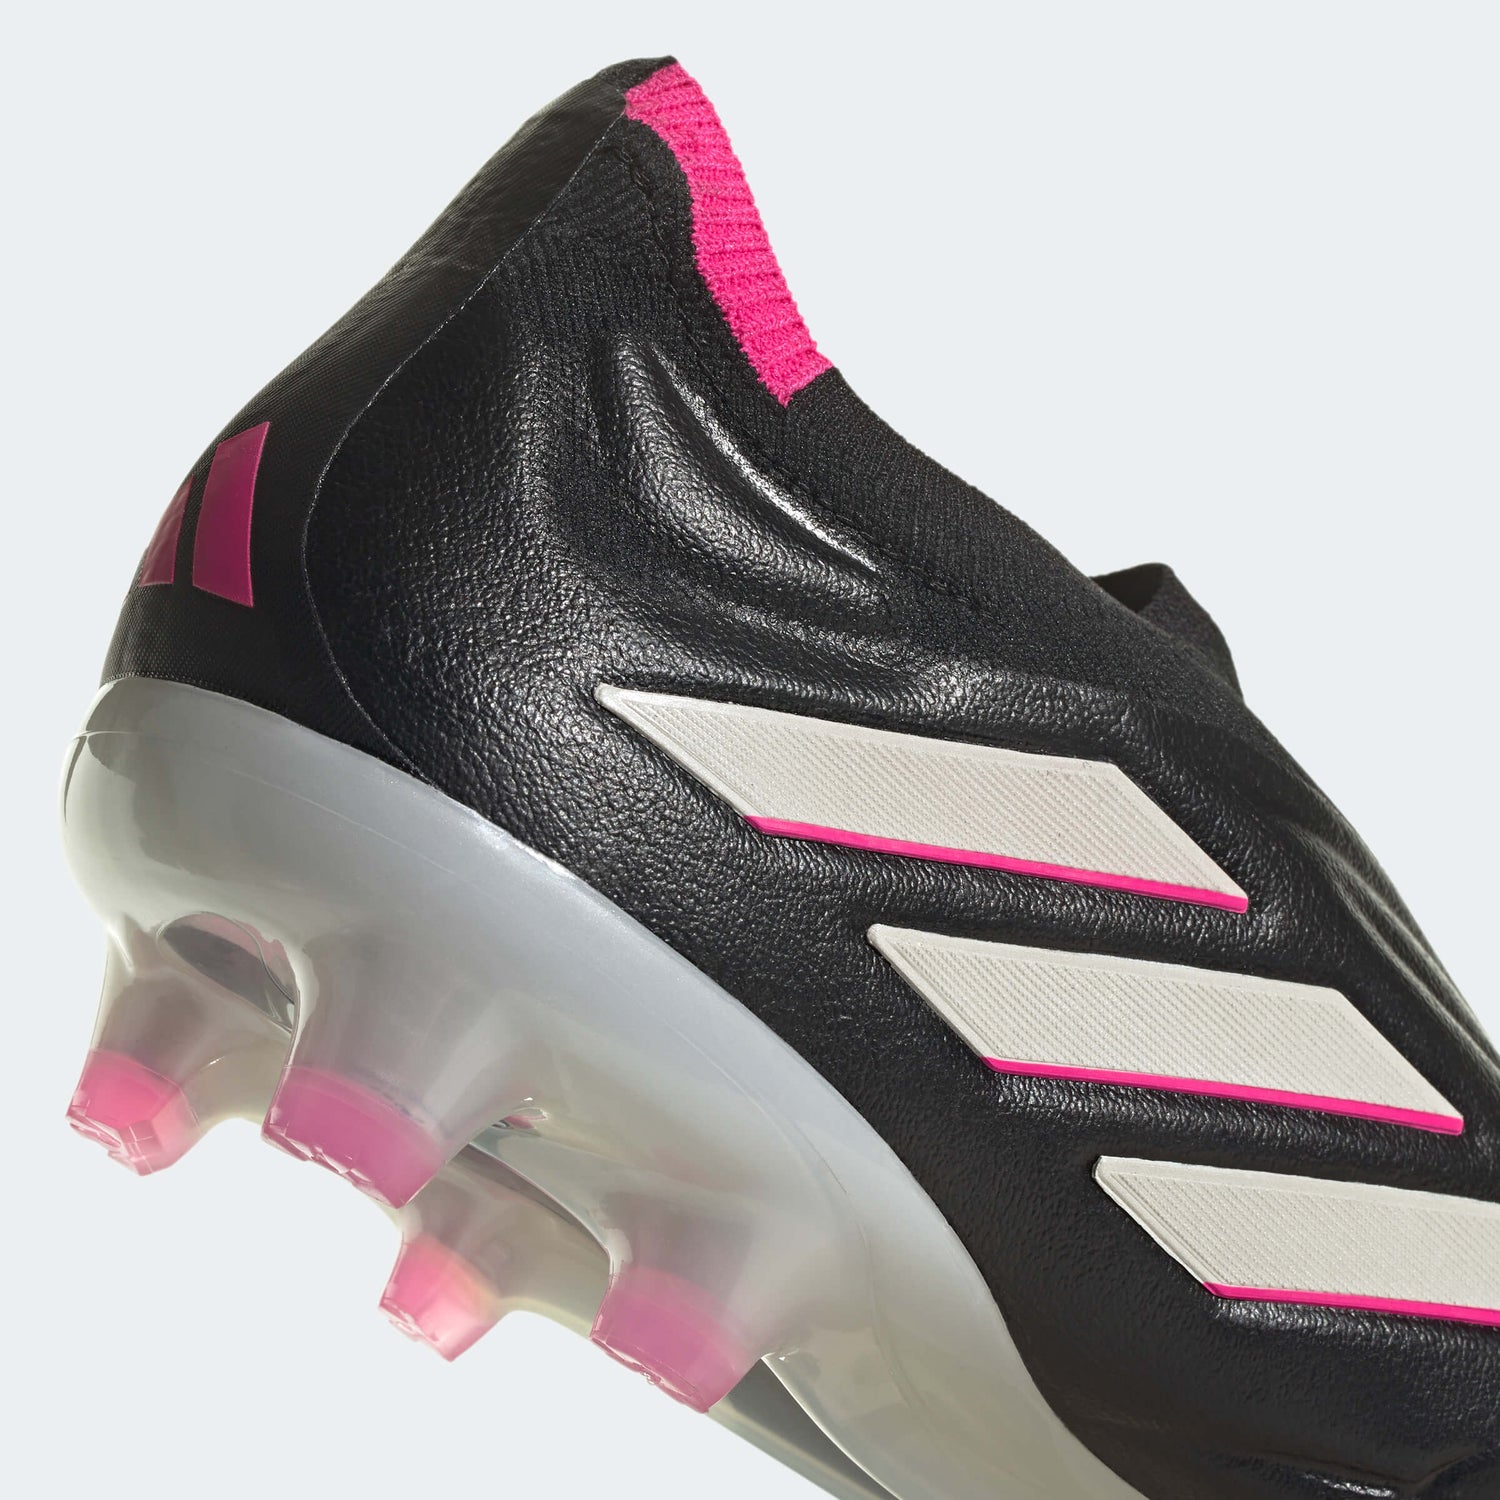 adidas Copa Pure+ FG - Own Your Football Pack (SP23) (Detail 2)